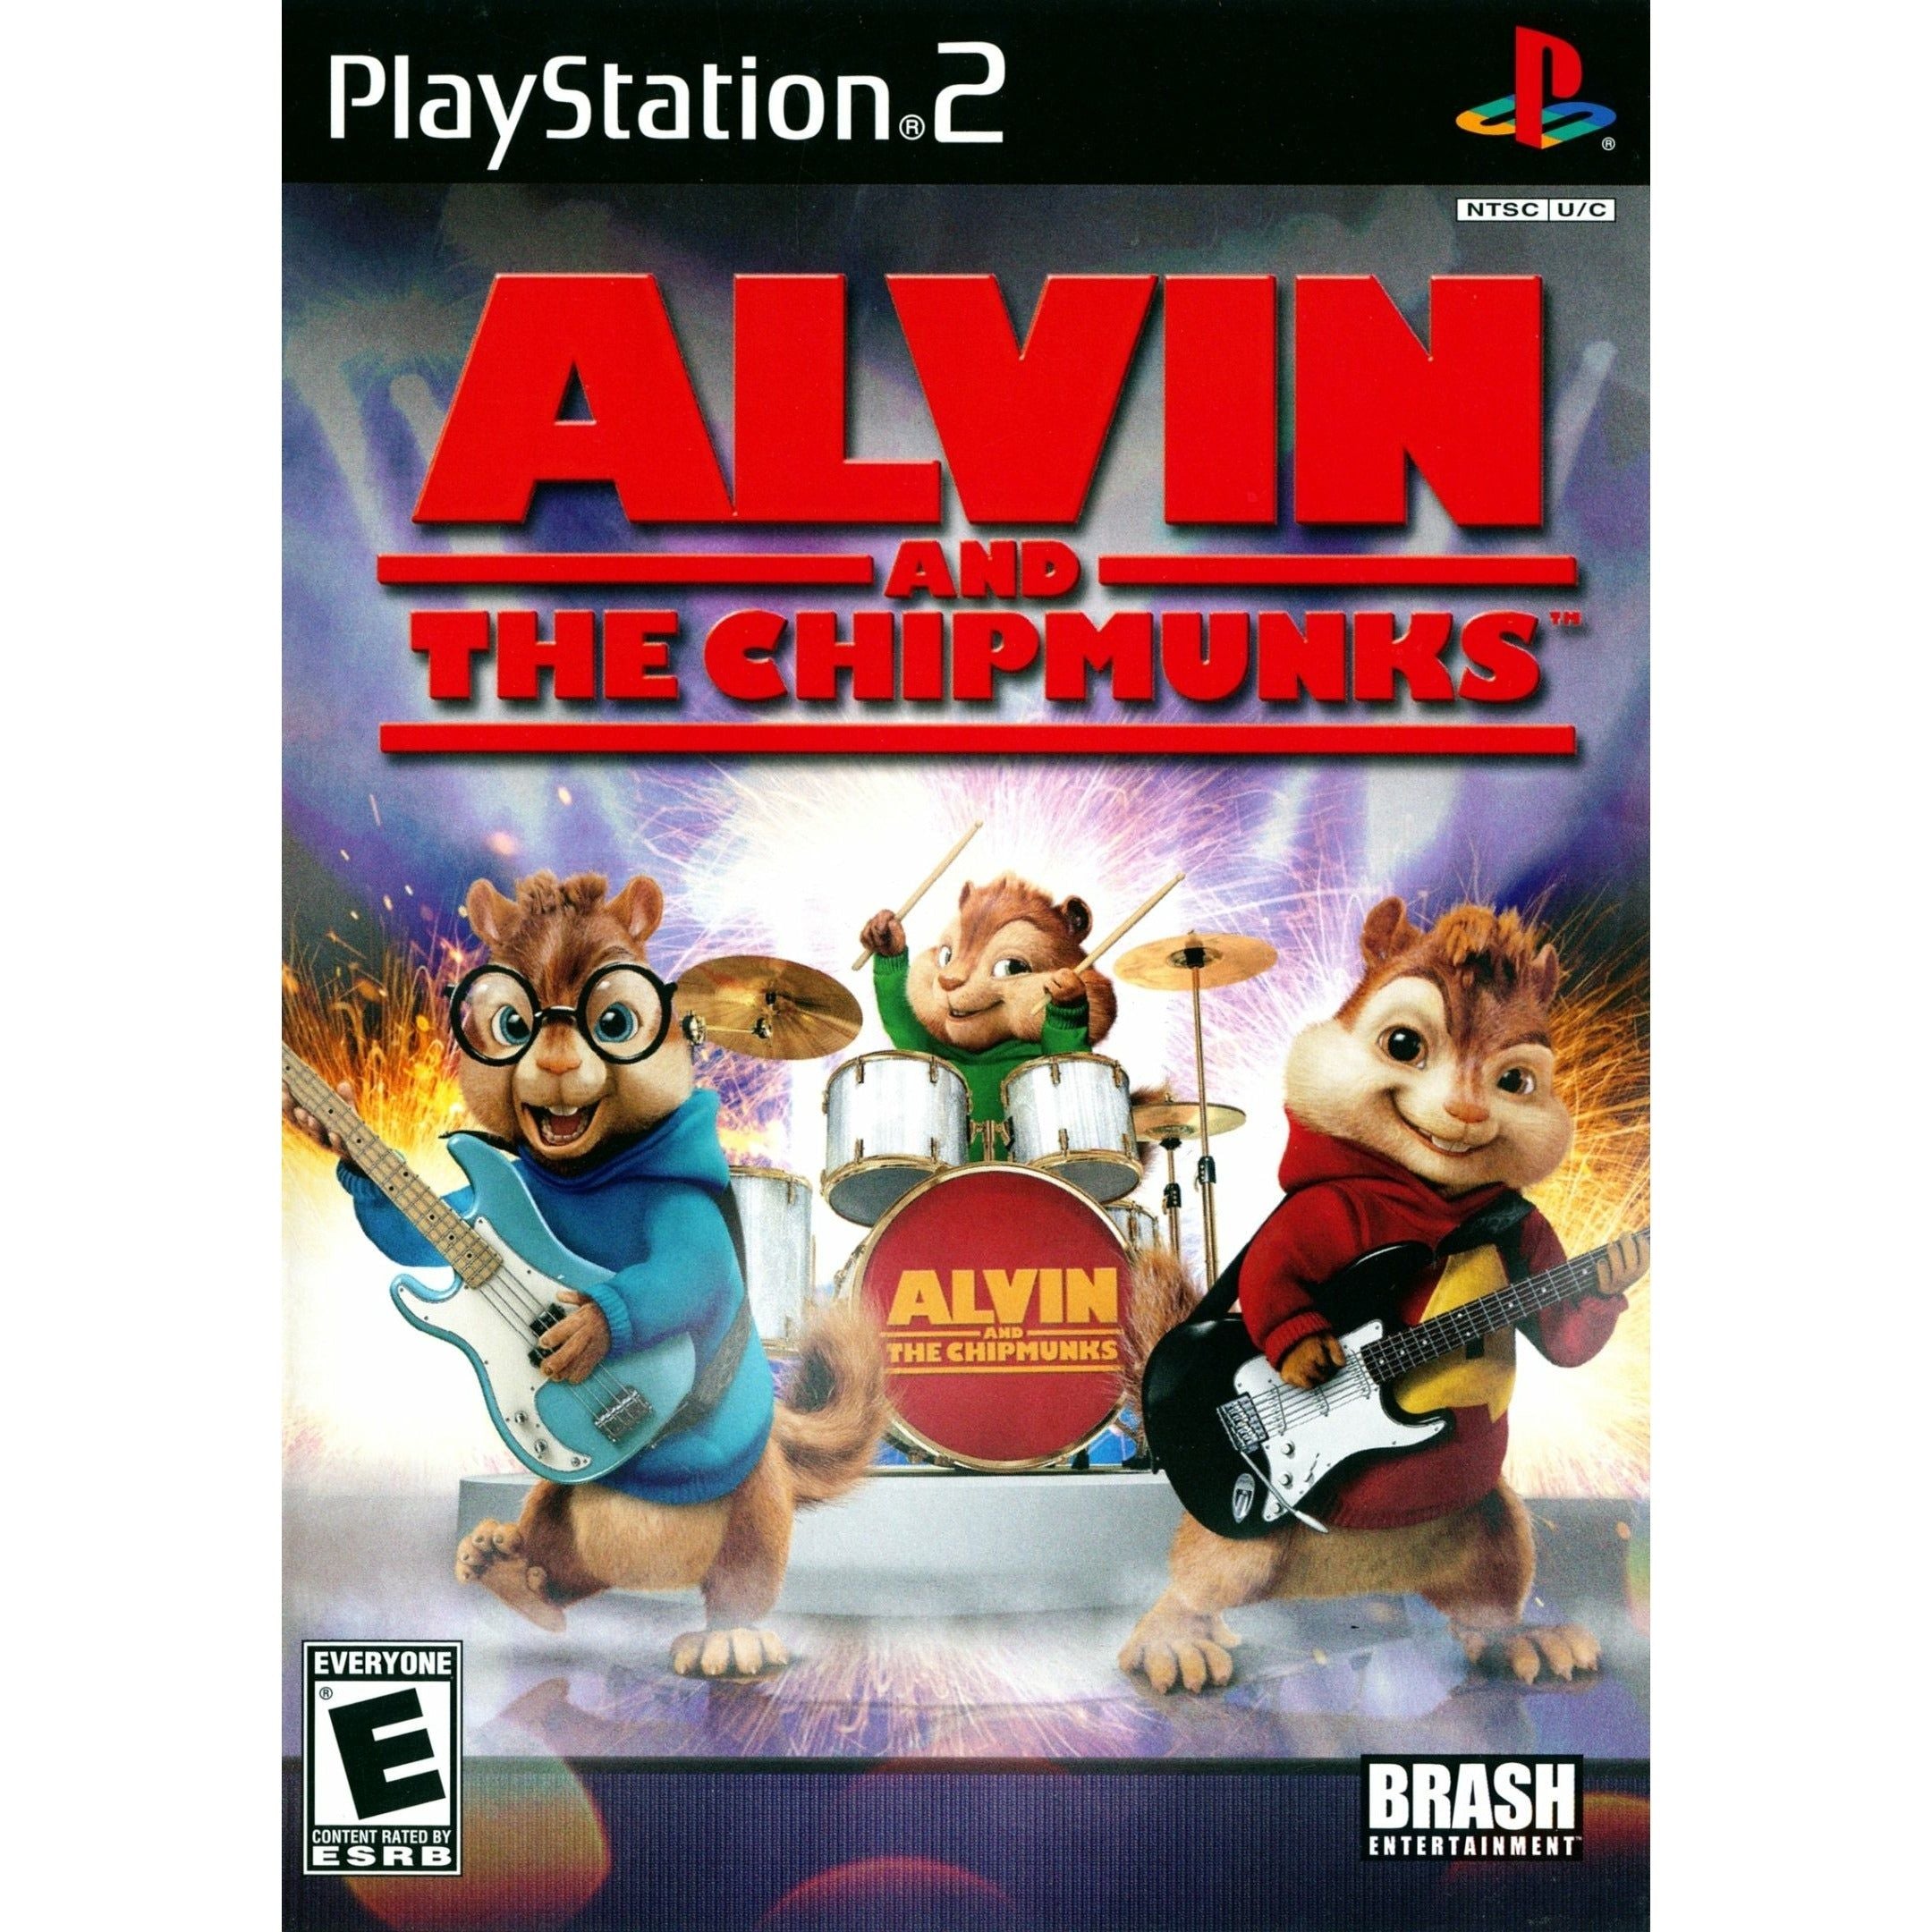 PS2 - Alvin and the Chipmunks